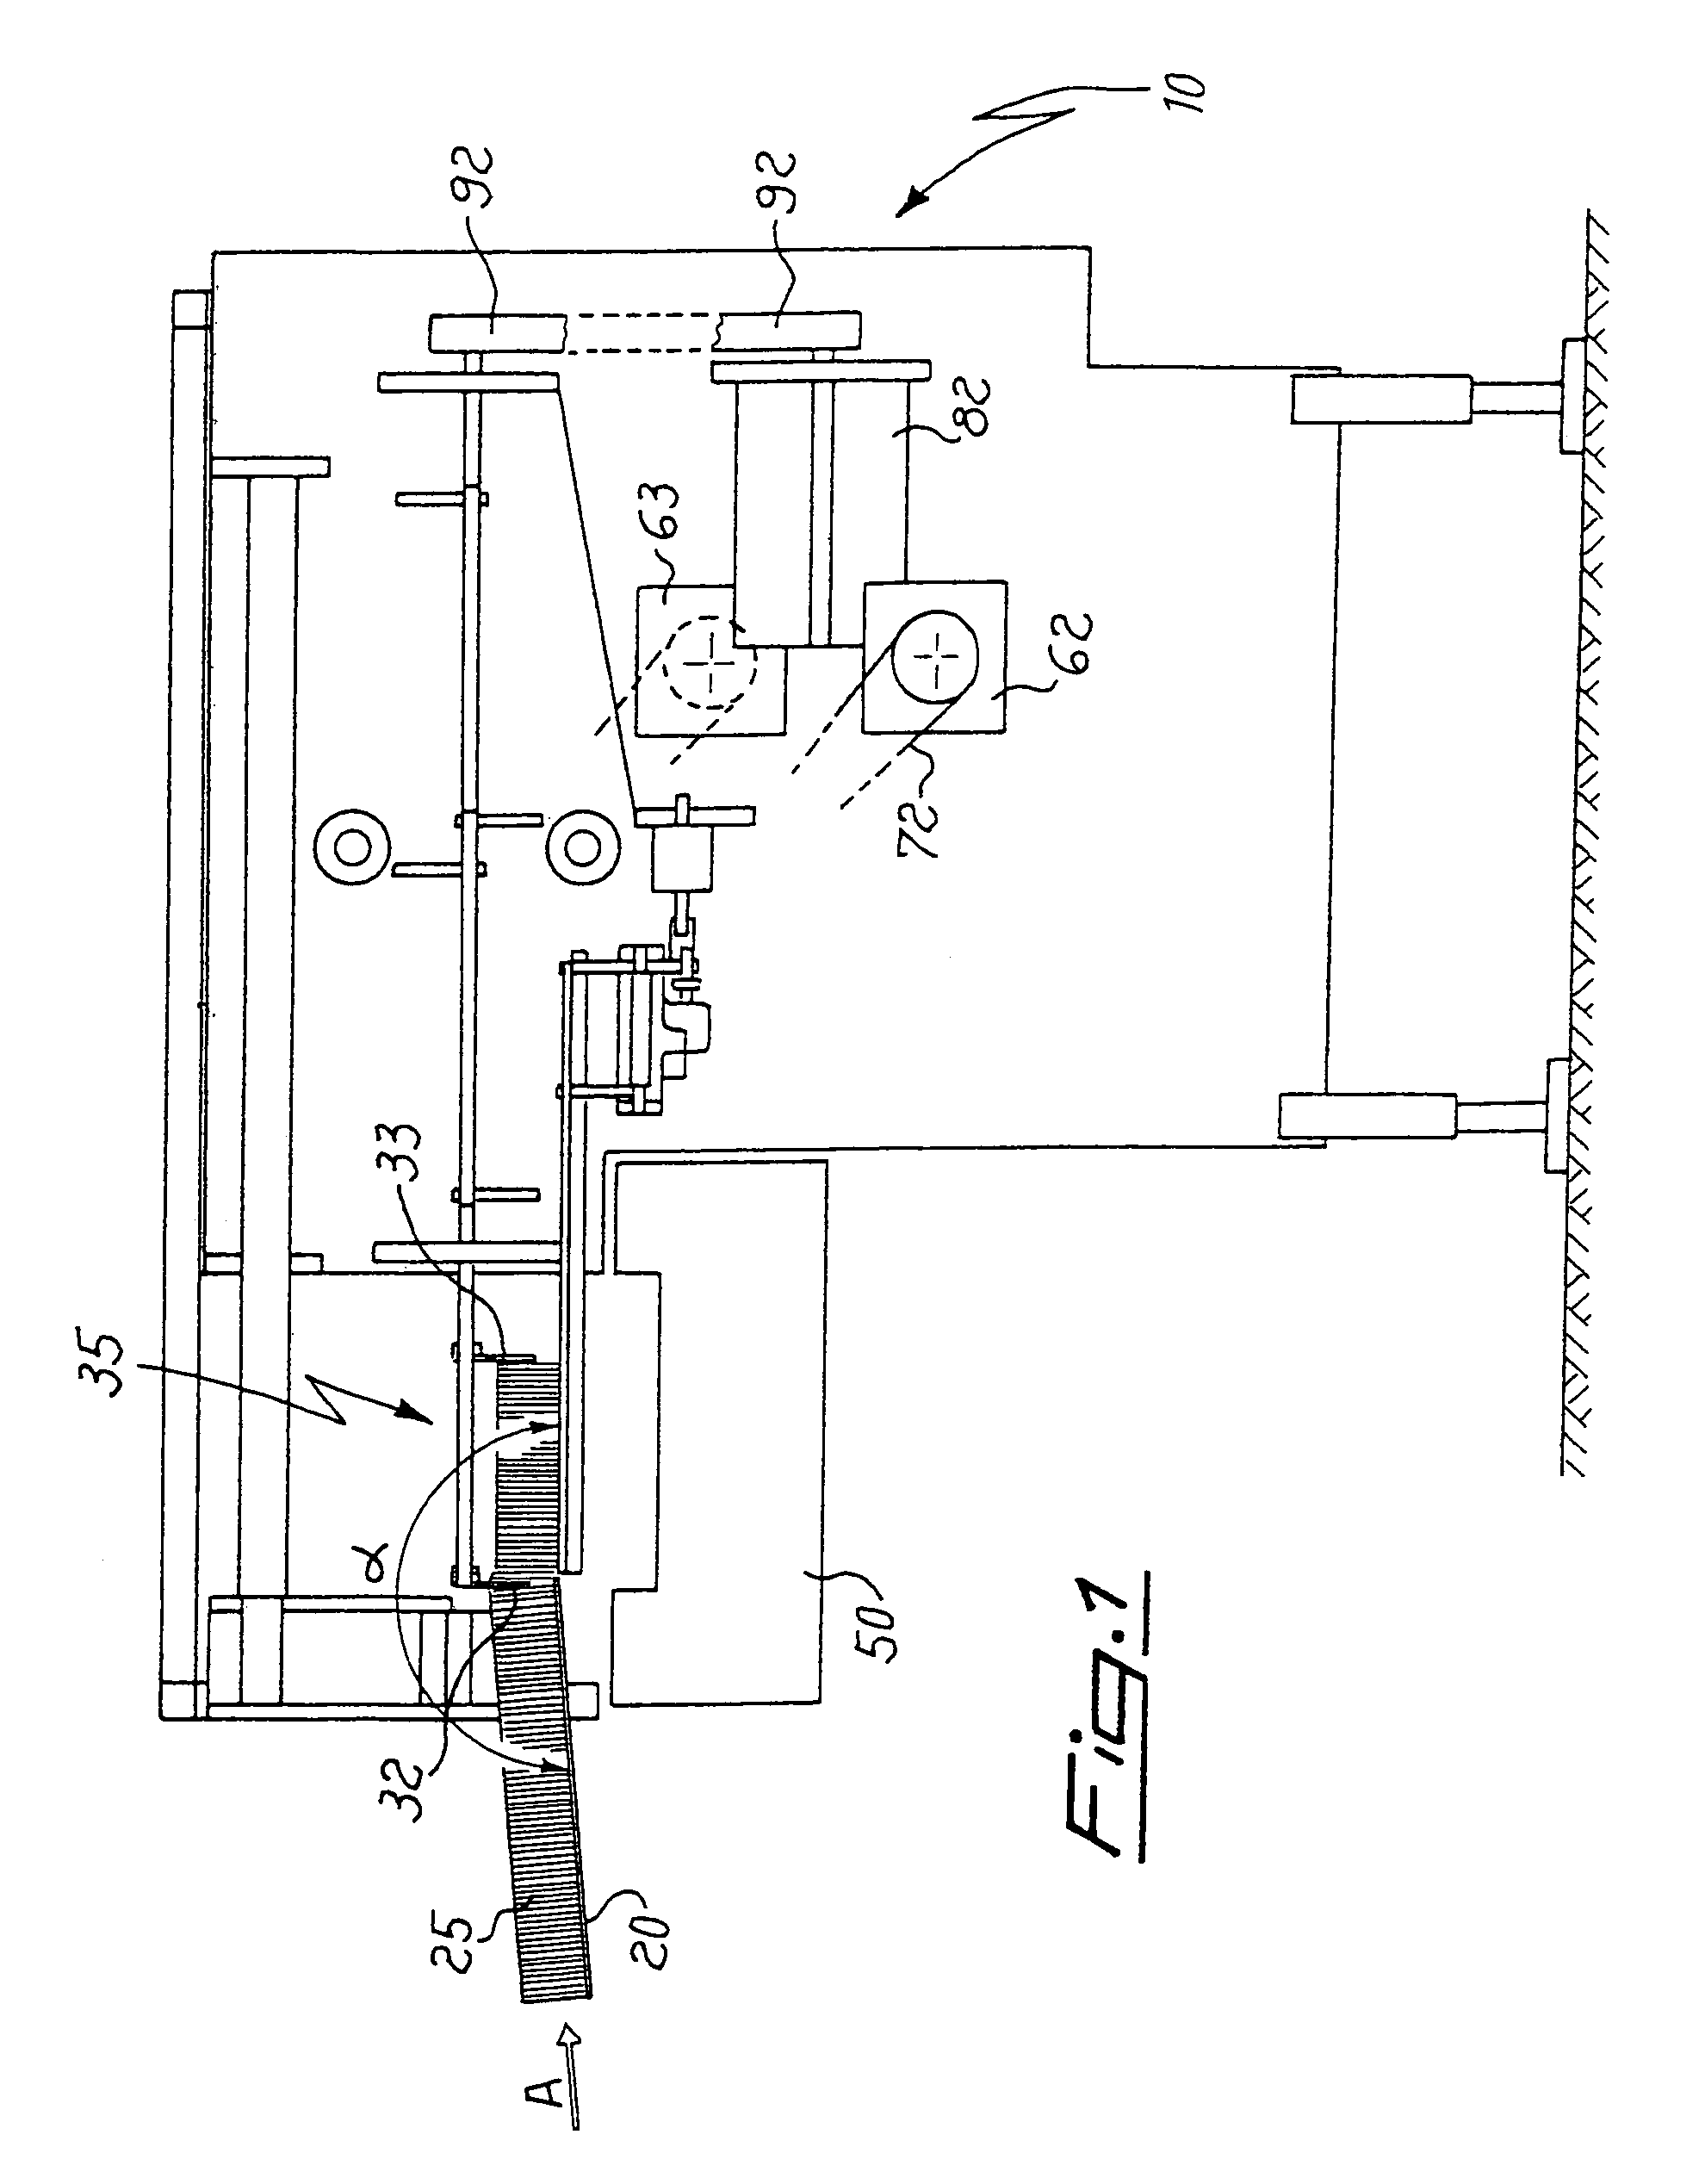 Machine and method for grouping products in stacks having a pre-set length